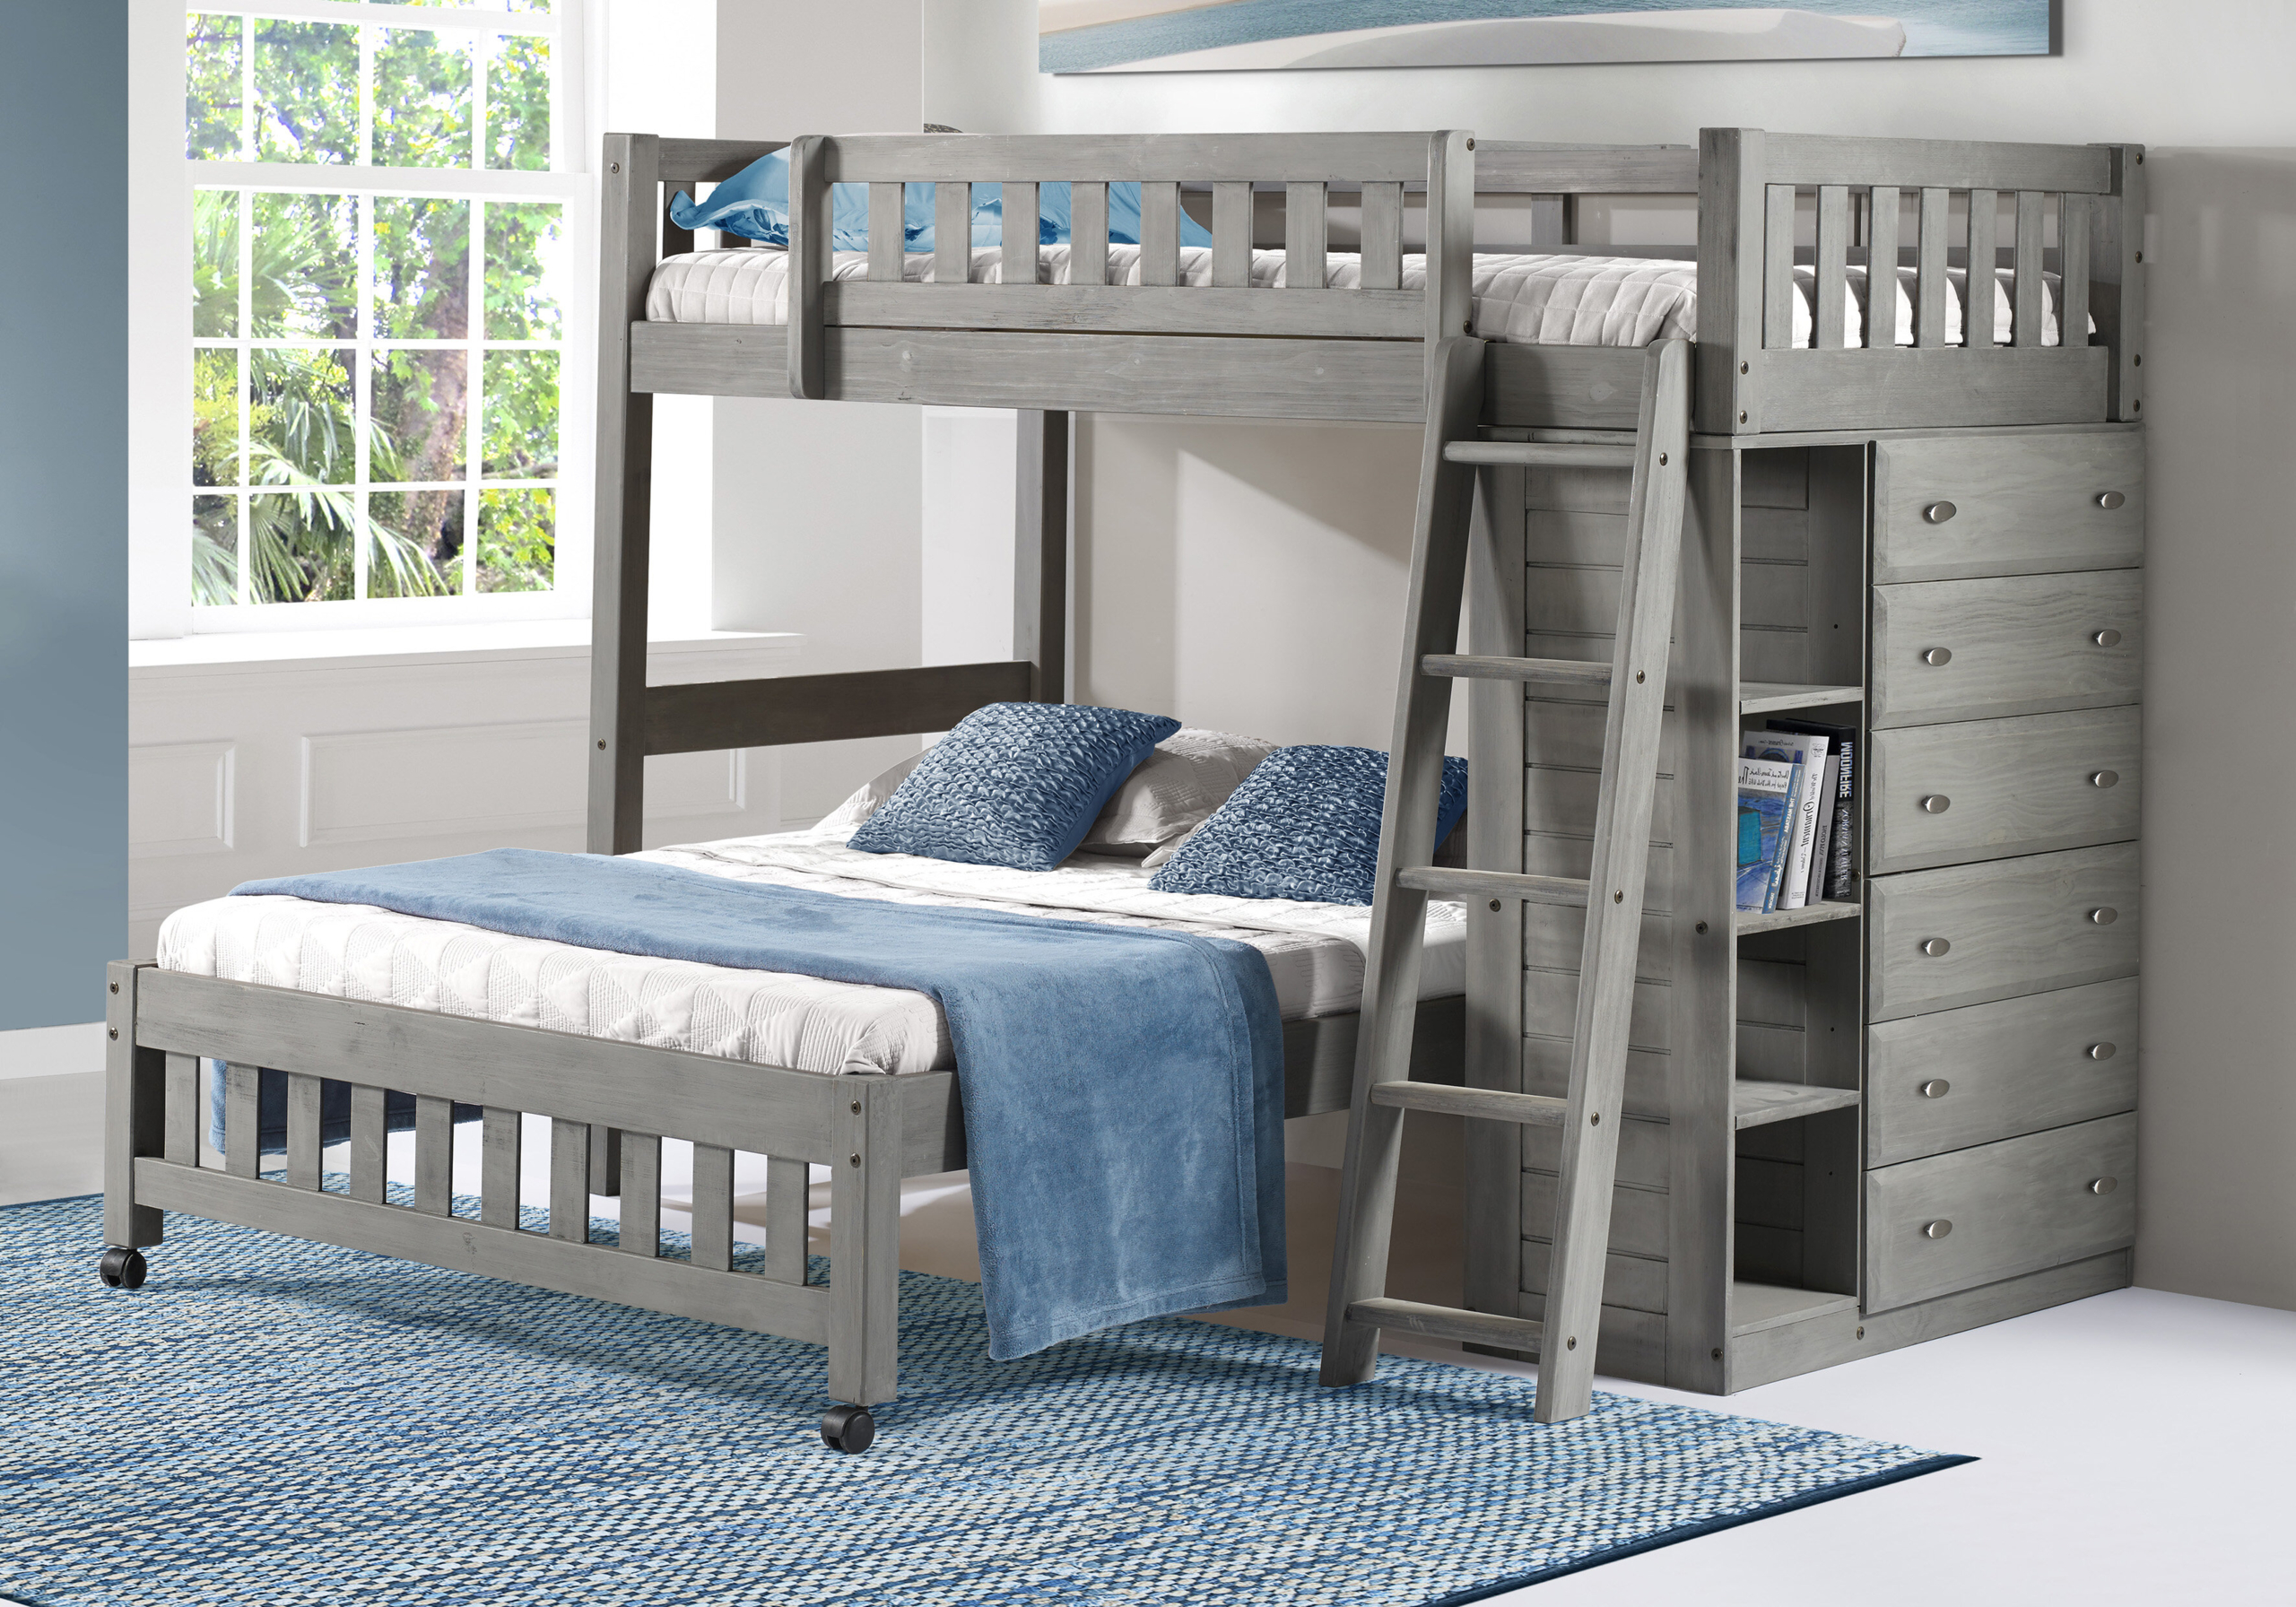 Bunk Beds With Dressers Visualhunt, Kids Bunk Beds With Dresser